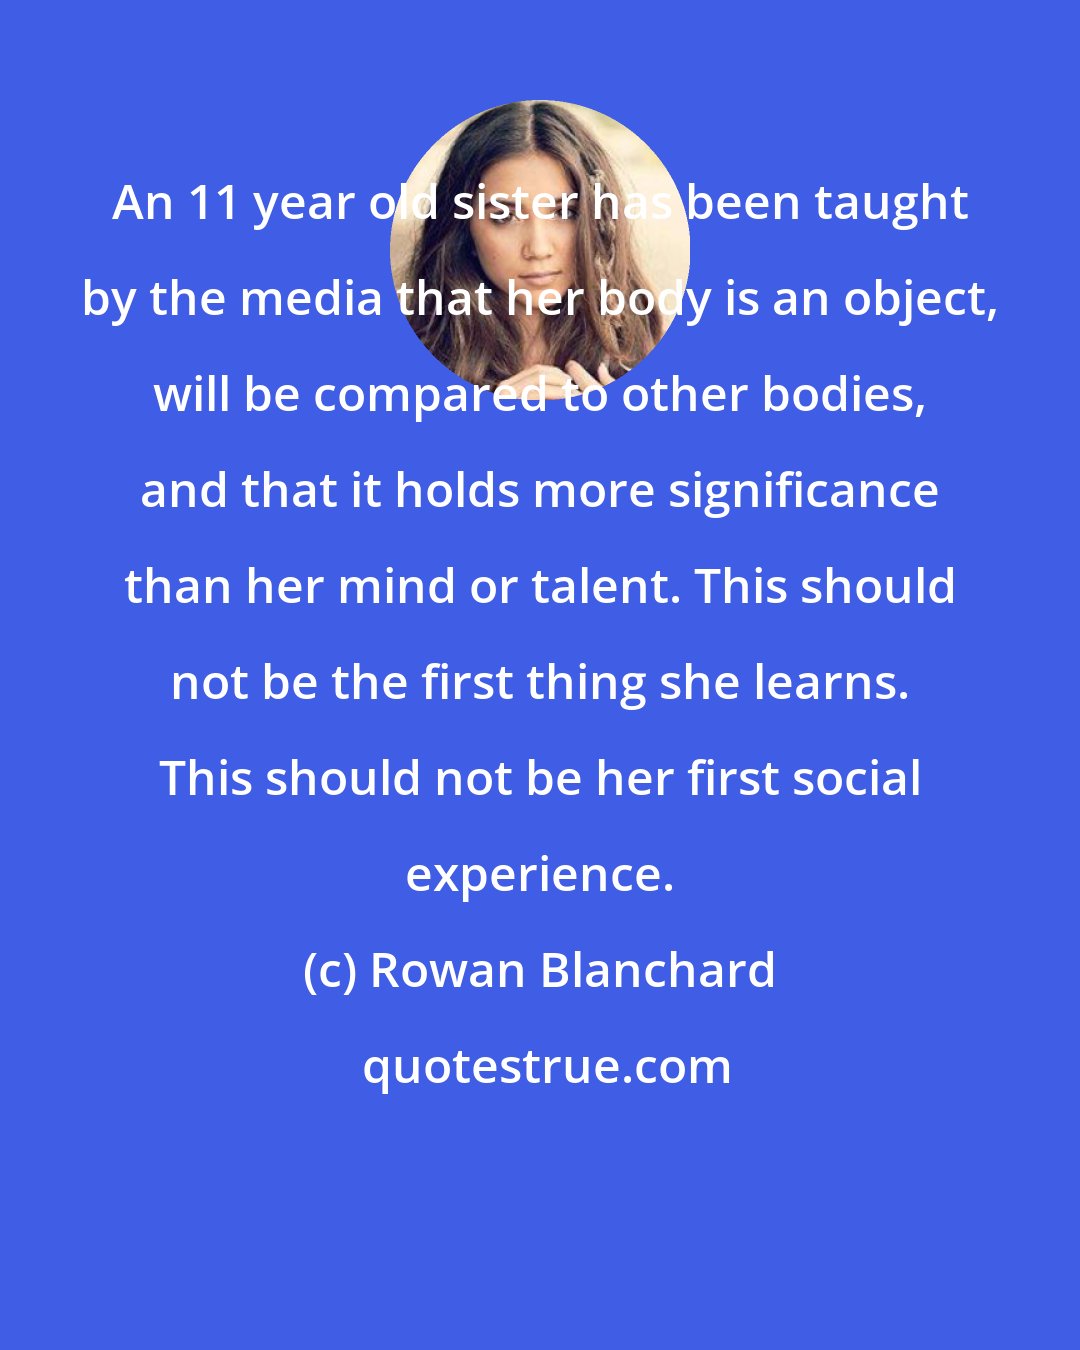 Rowan Blanchard: An 11 year old sister has been taught by the media that her body is an object, will be compared to other bodies, and that it holds more significance than her mind or talent. This should not be the first thing she learns. This should not be her first social experience.